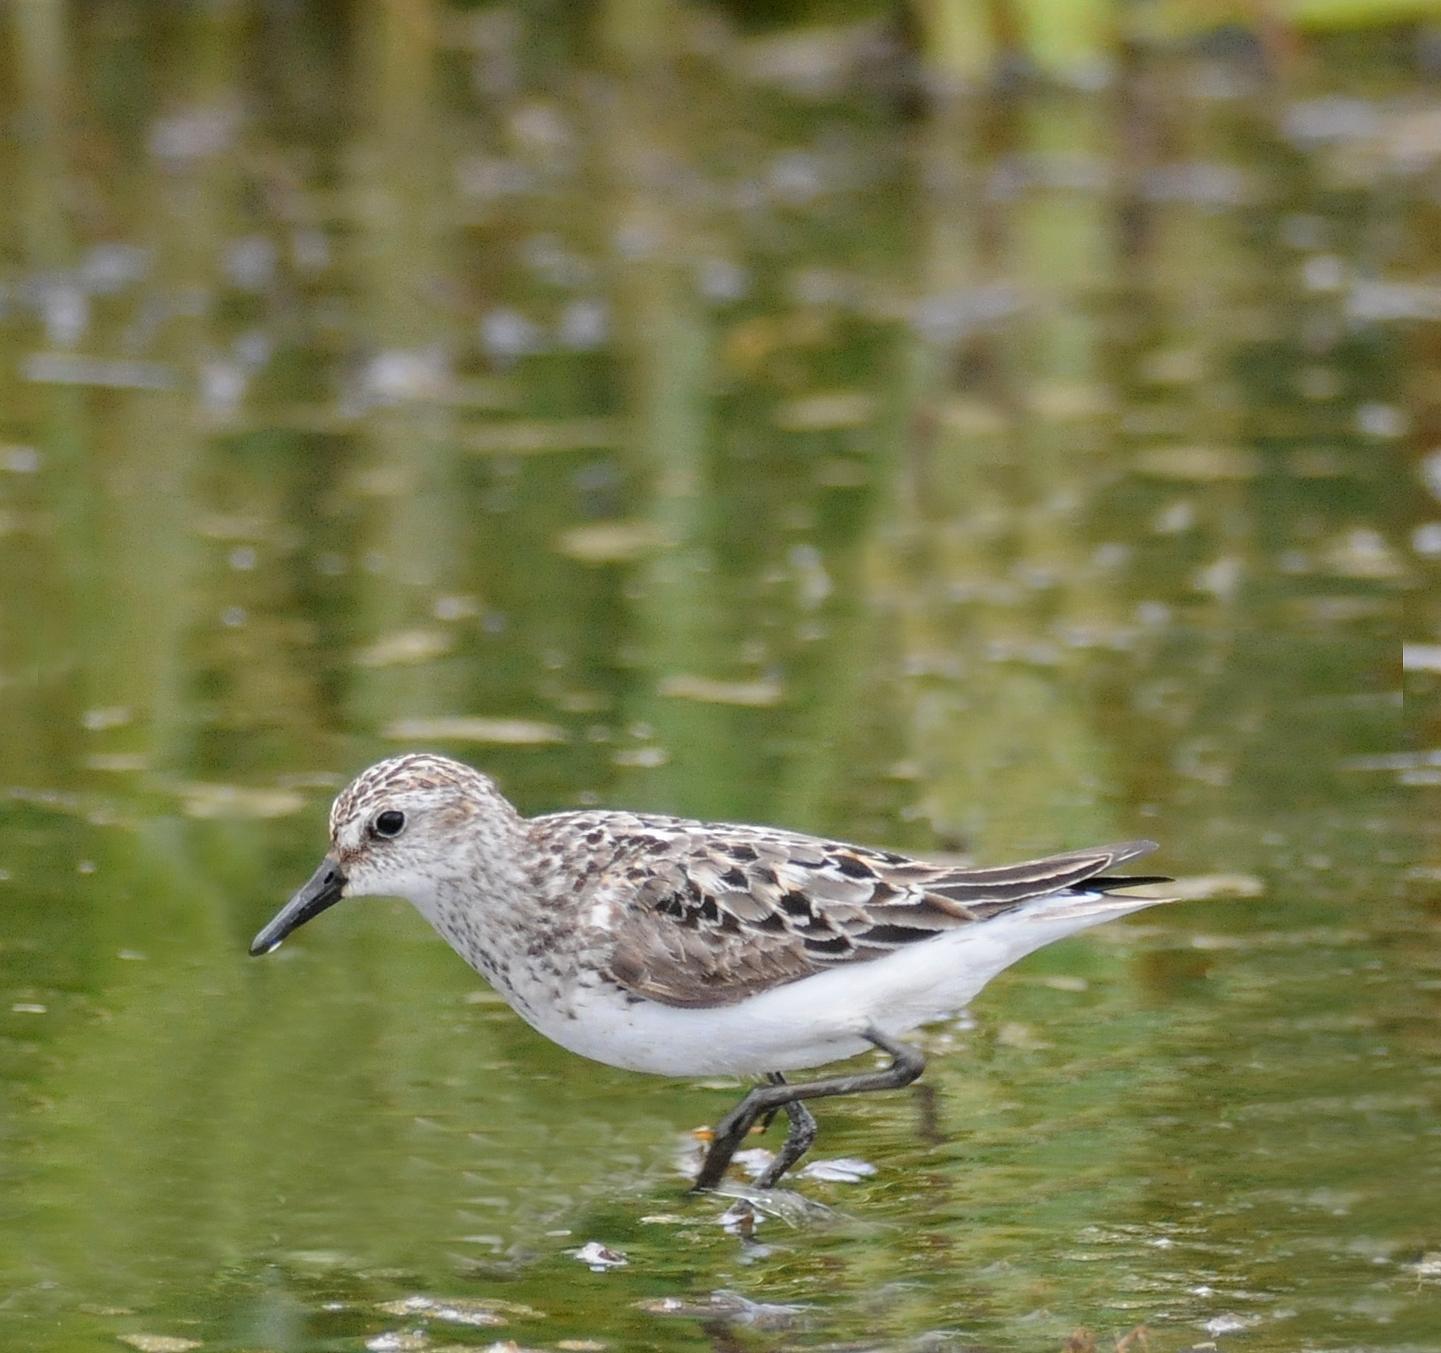 Semipalmated Sandpiper Photo by Steven Mlodinow